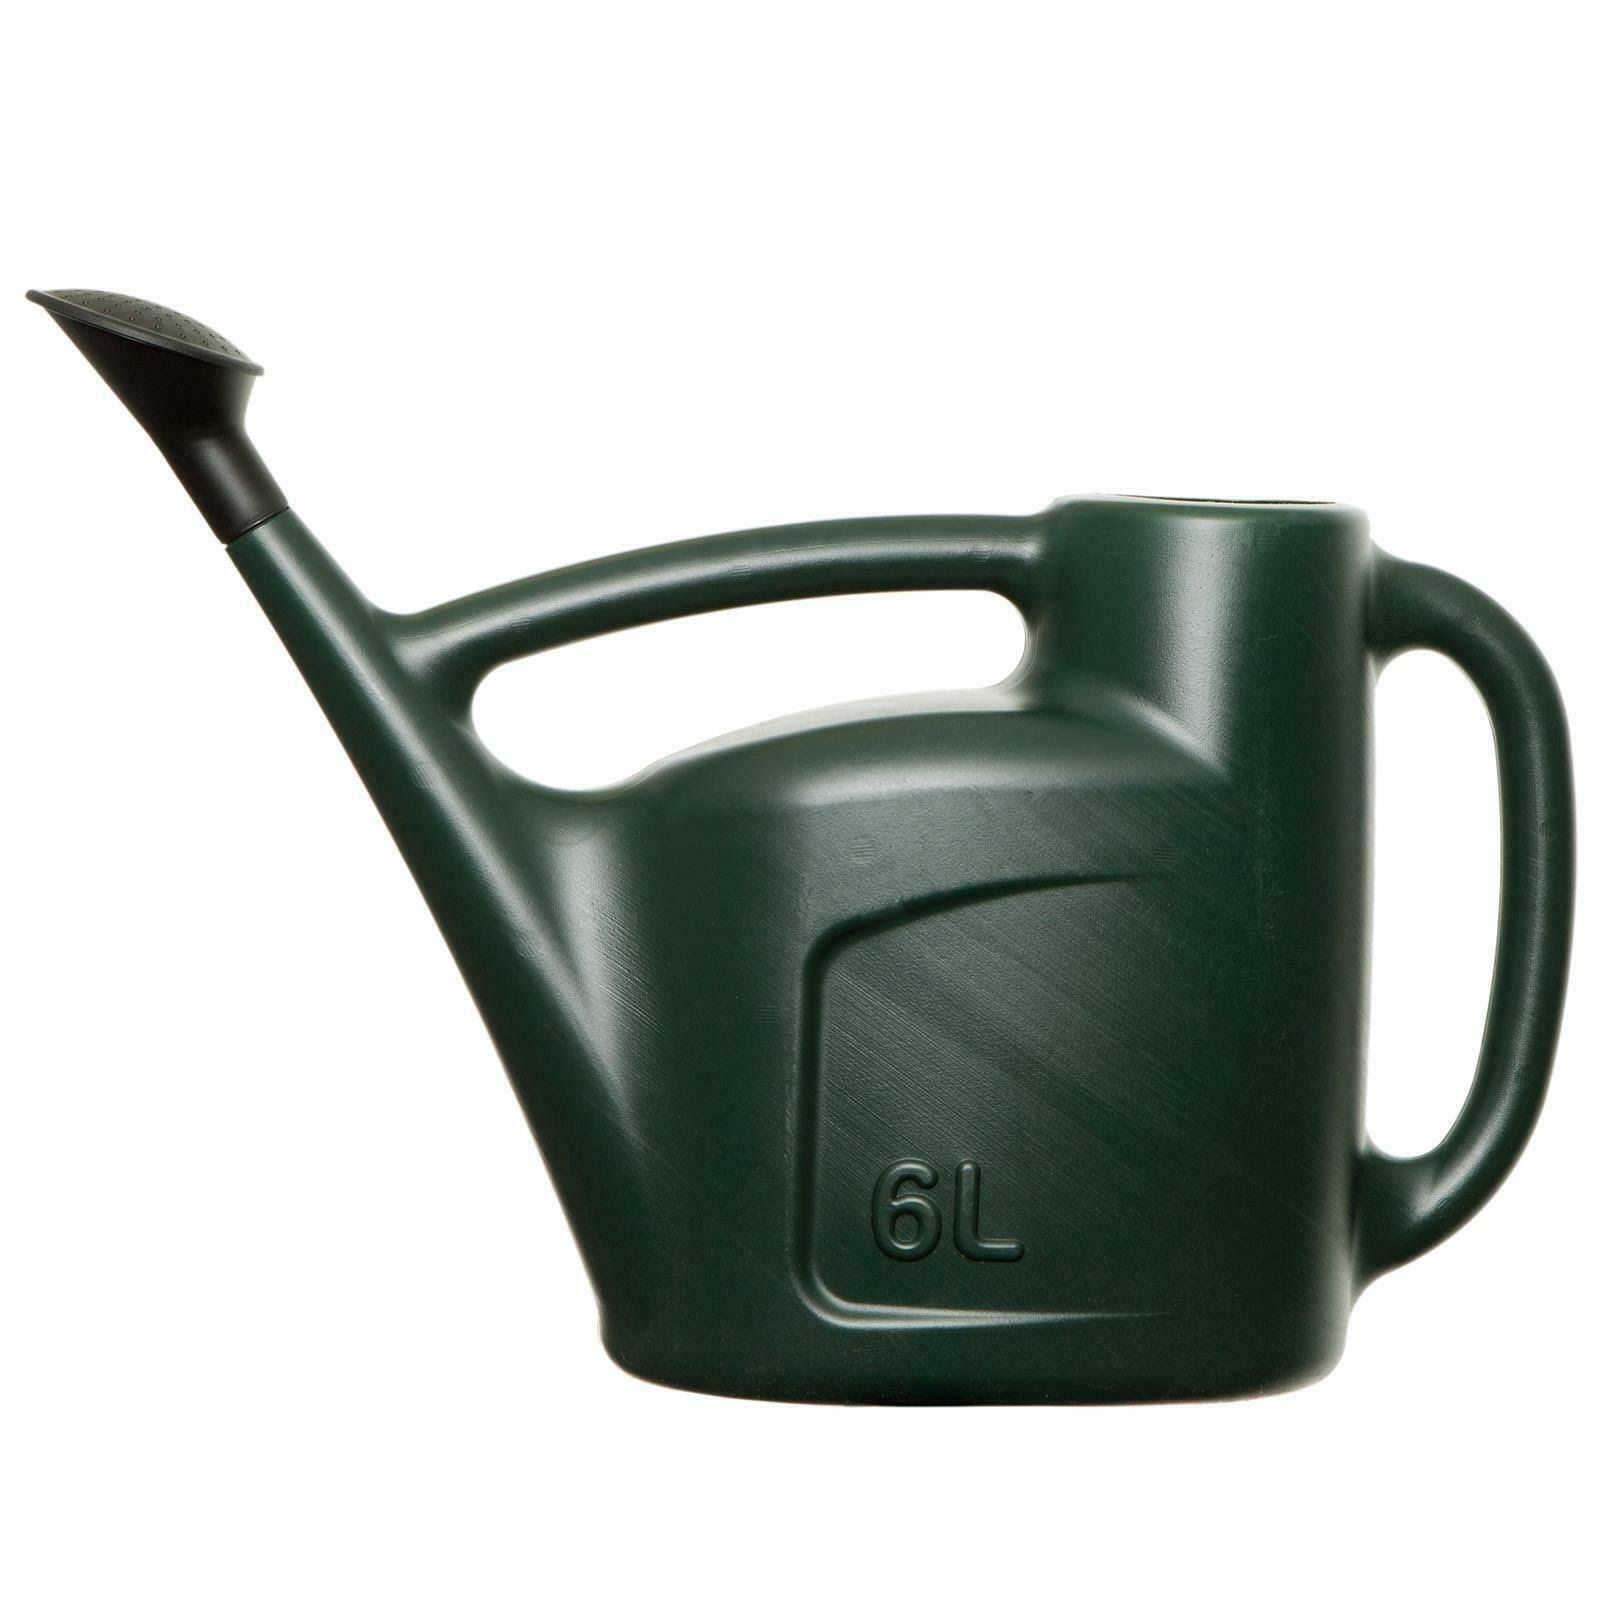 6L Watering Can, Green - WHITEFURZE